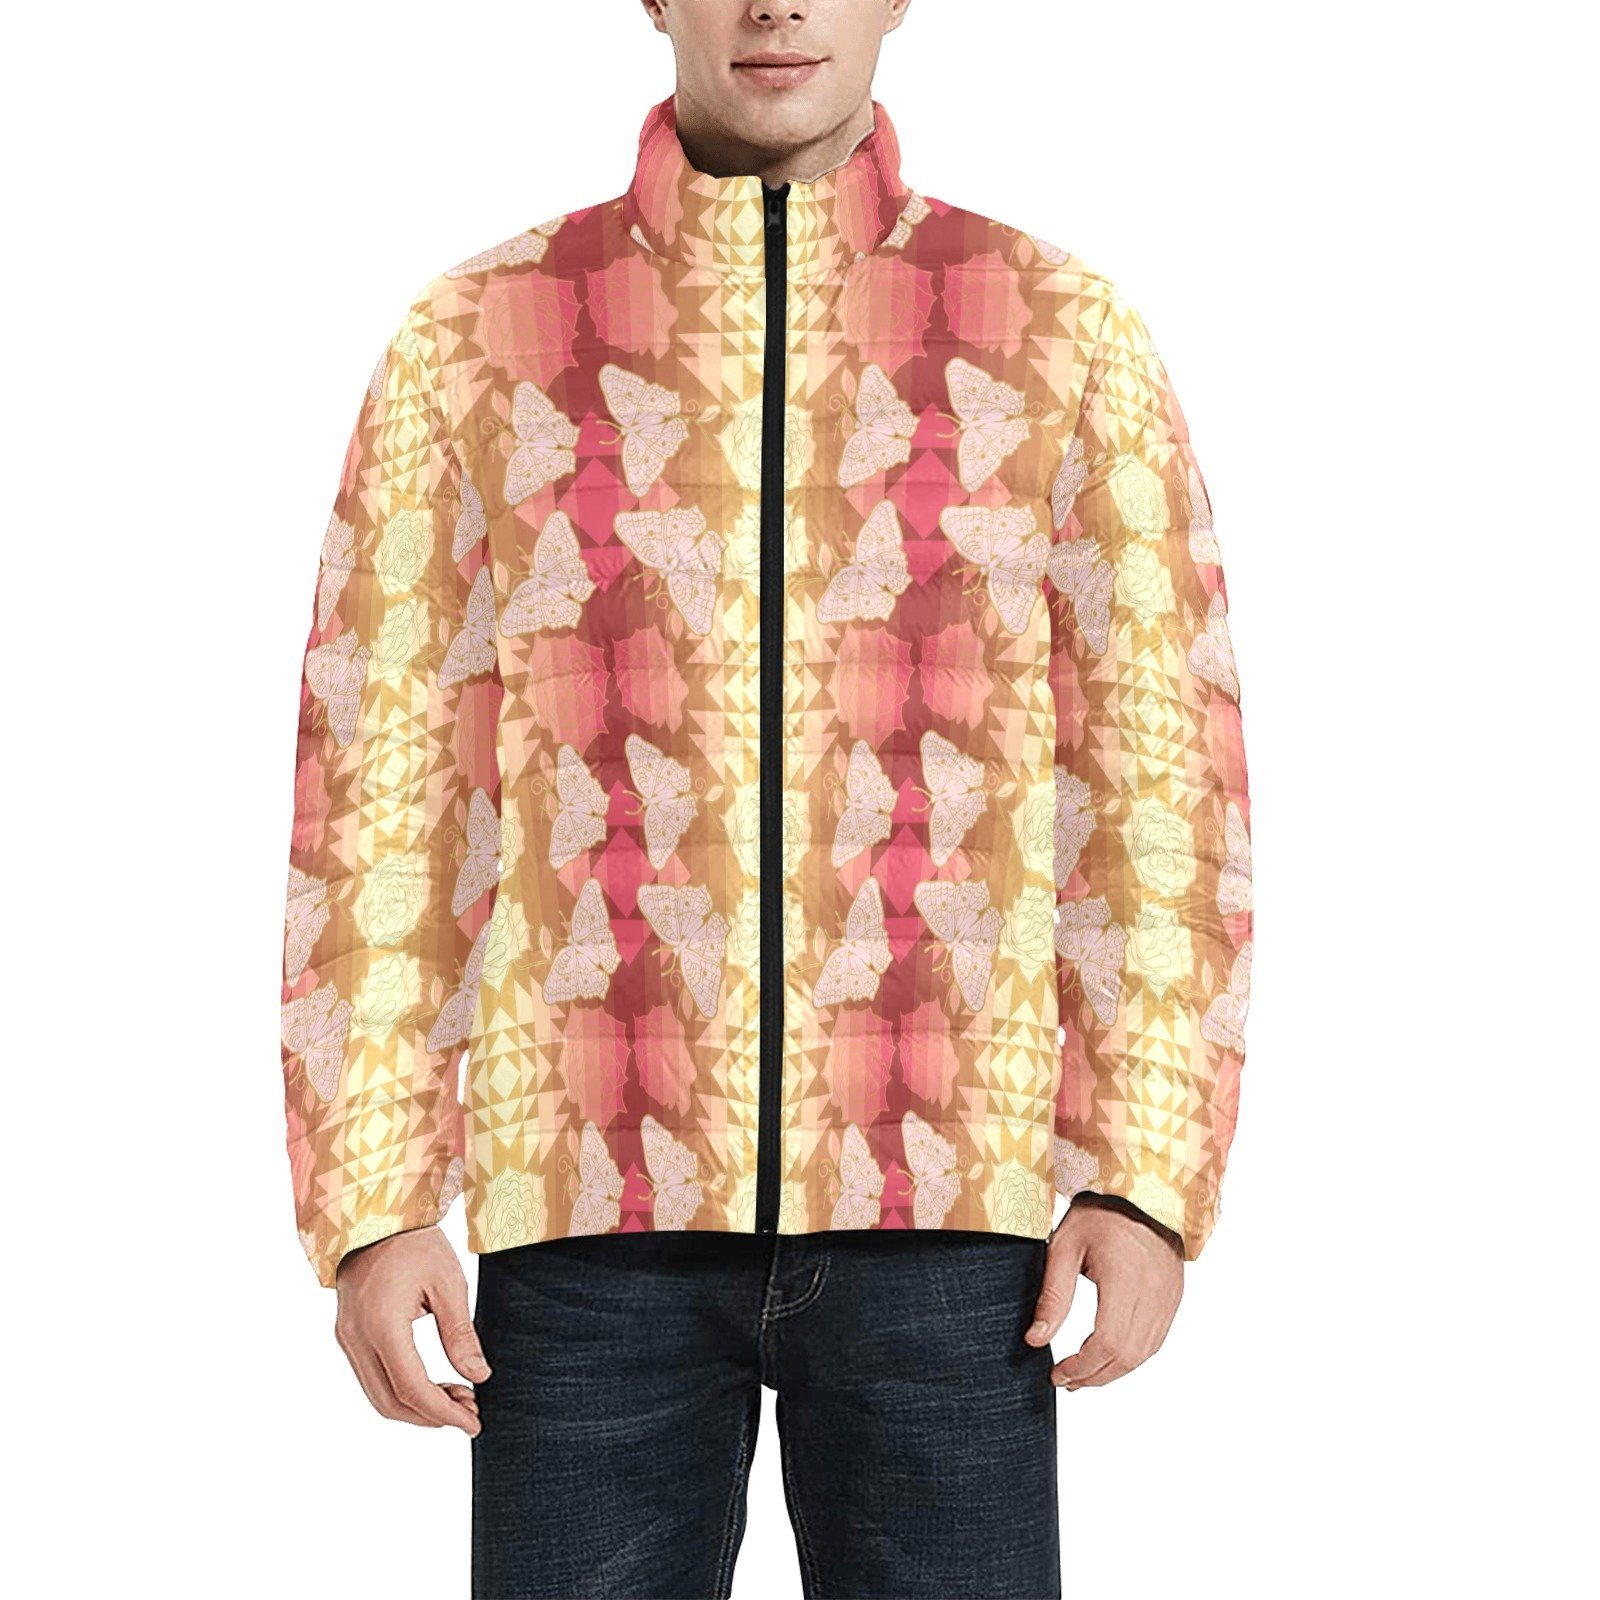 Butterfly and Roses on Geometric Men's Stand Collar Padded Jacket (Model H41) Men's Stand Collar Padded Jacket (H41) e-joyer 